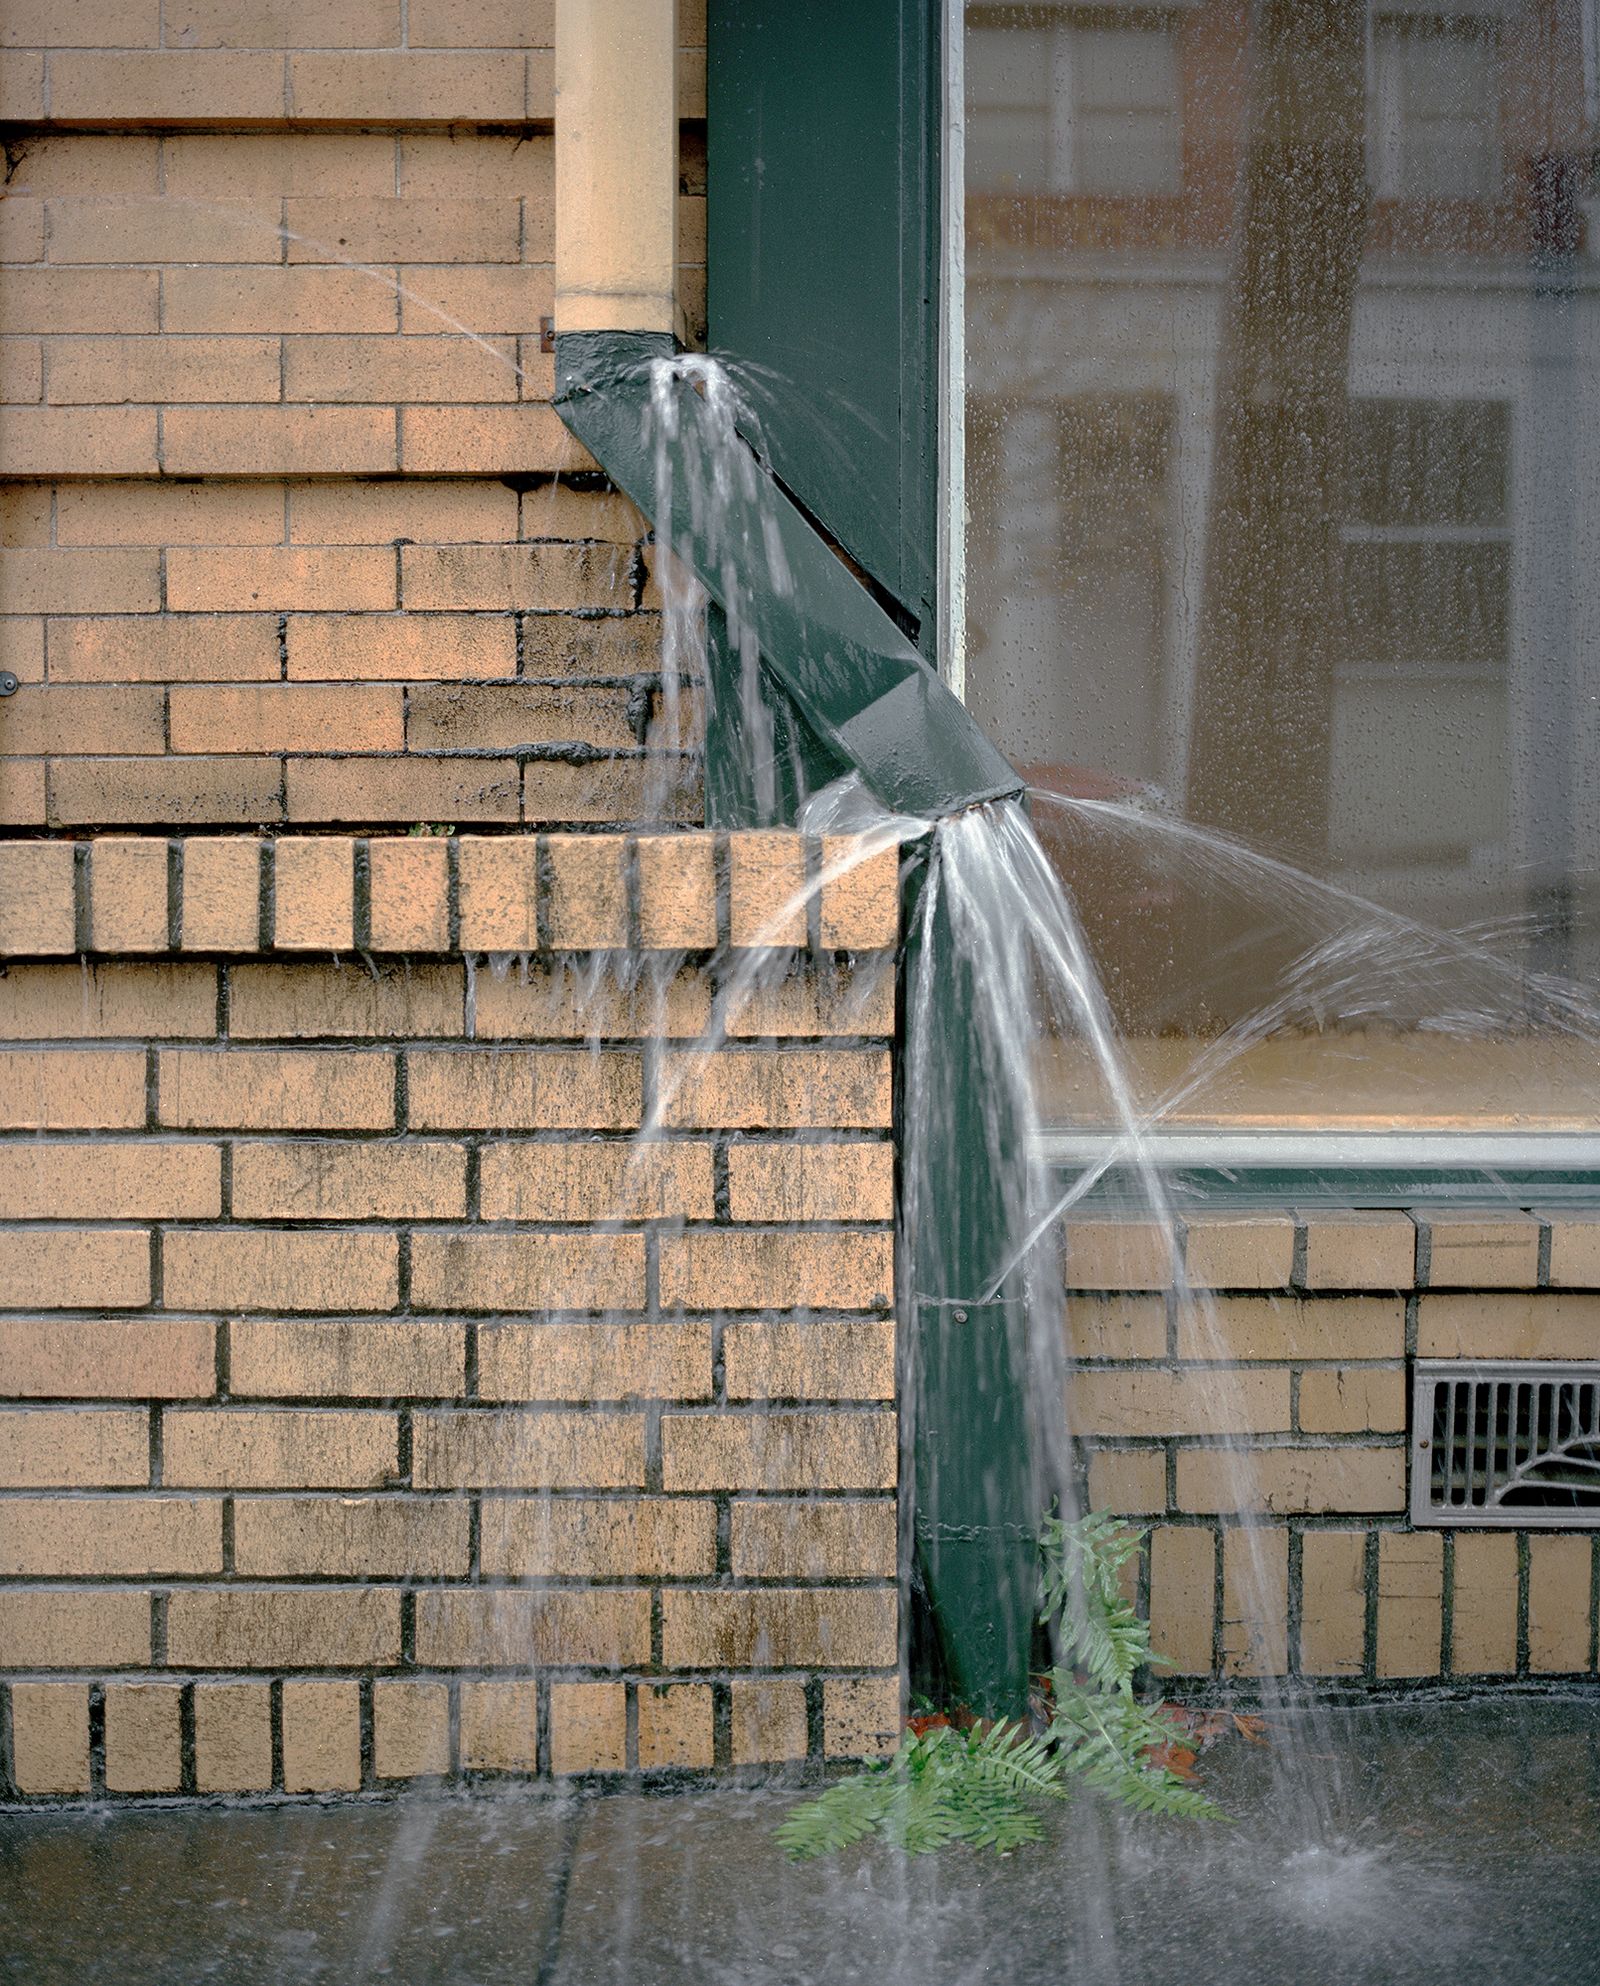 © Justin Maxon - A busted drain spout is seen during a heavy rain storm in Eureka.